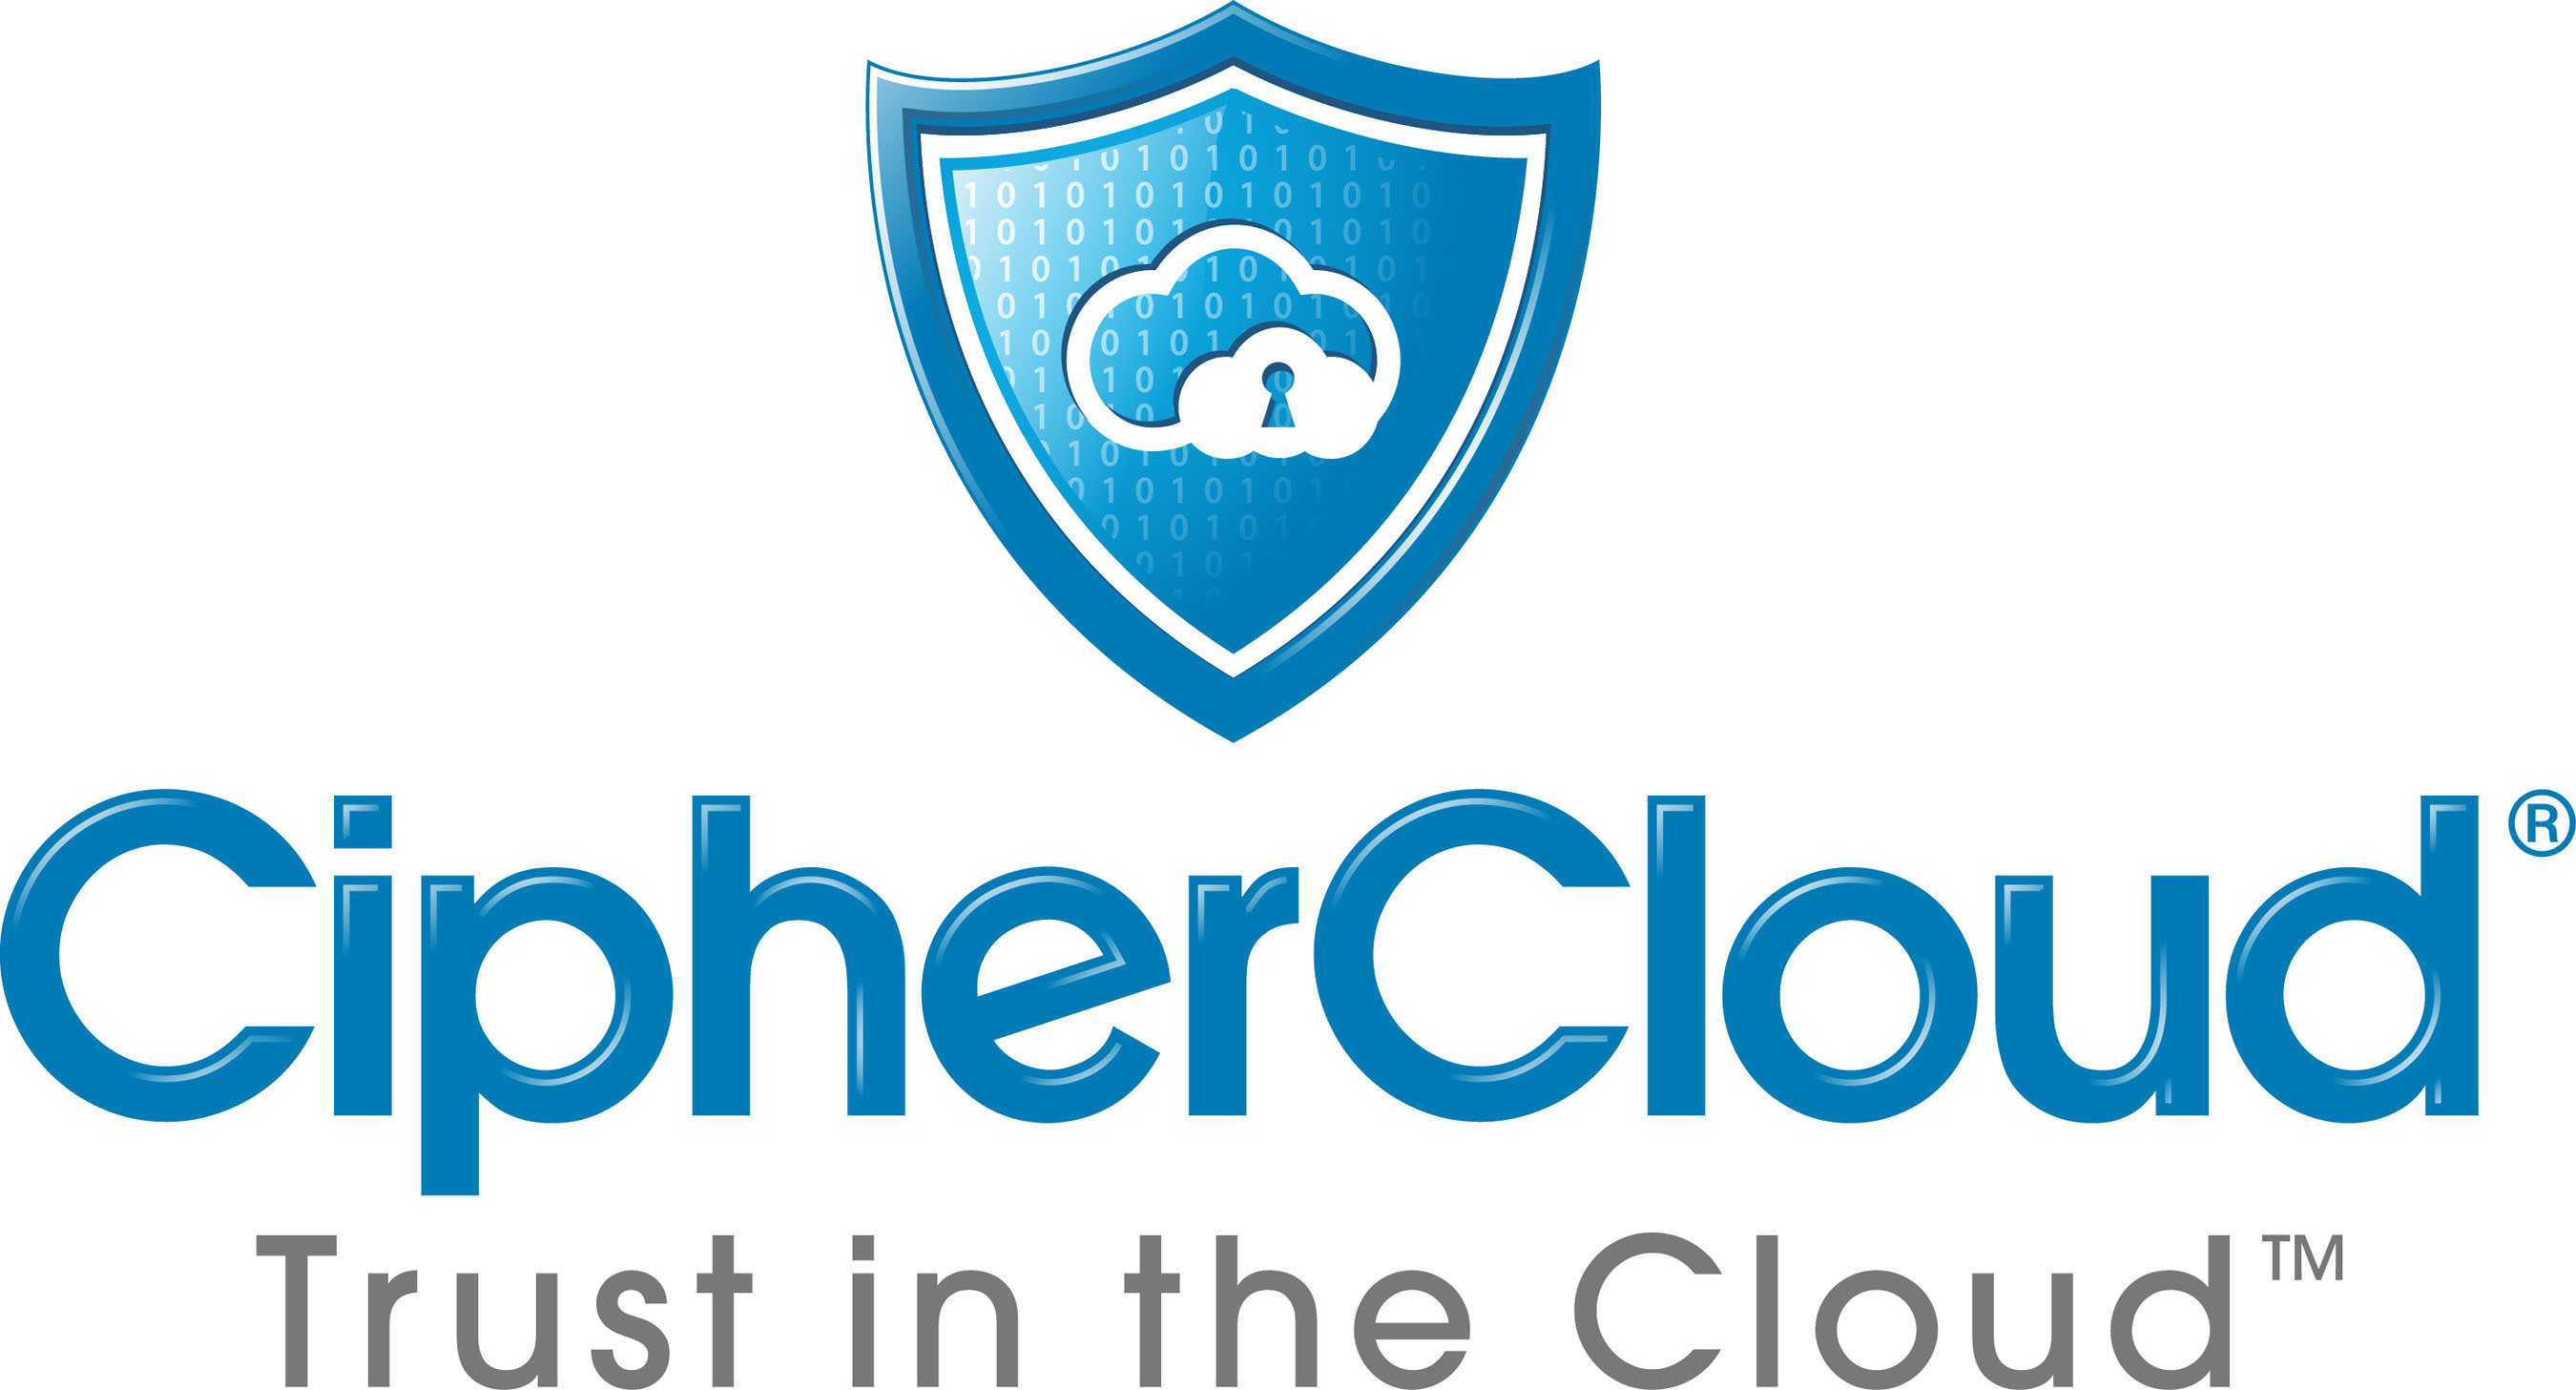 CipherCloud, the leader in cloud information protection, enables organizations to securely adopt cloud applications by overcoming data privacy, residency, security, and regulatory compliance risks. CipherCloud's open platform provides comprehensive security controls including encryption, tokenization, cloud data loss prevention, cloud malware detection, and activity monitoring. The CipherCloud product portfolio protects popular cloud applications out-of-the-box such as Salesforce, Force.com, Chatter, Box, Google Gmail, Microsoft Office 365, and Amazon Web Services. CipherCloud's ground breaking technology protects sensitive information in real time, before it is sent to the cloud, while preserving application usability and functionality for its more than 1.2 million business users